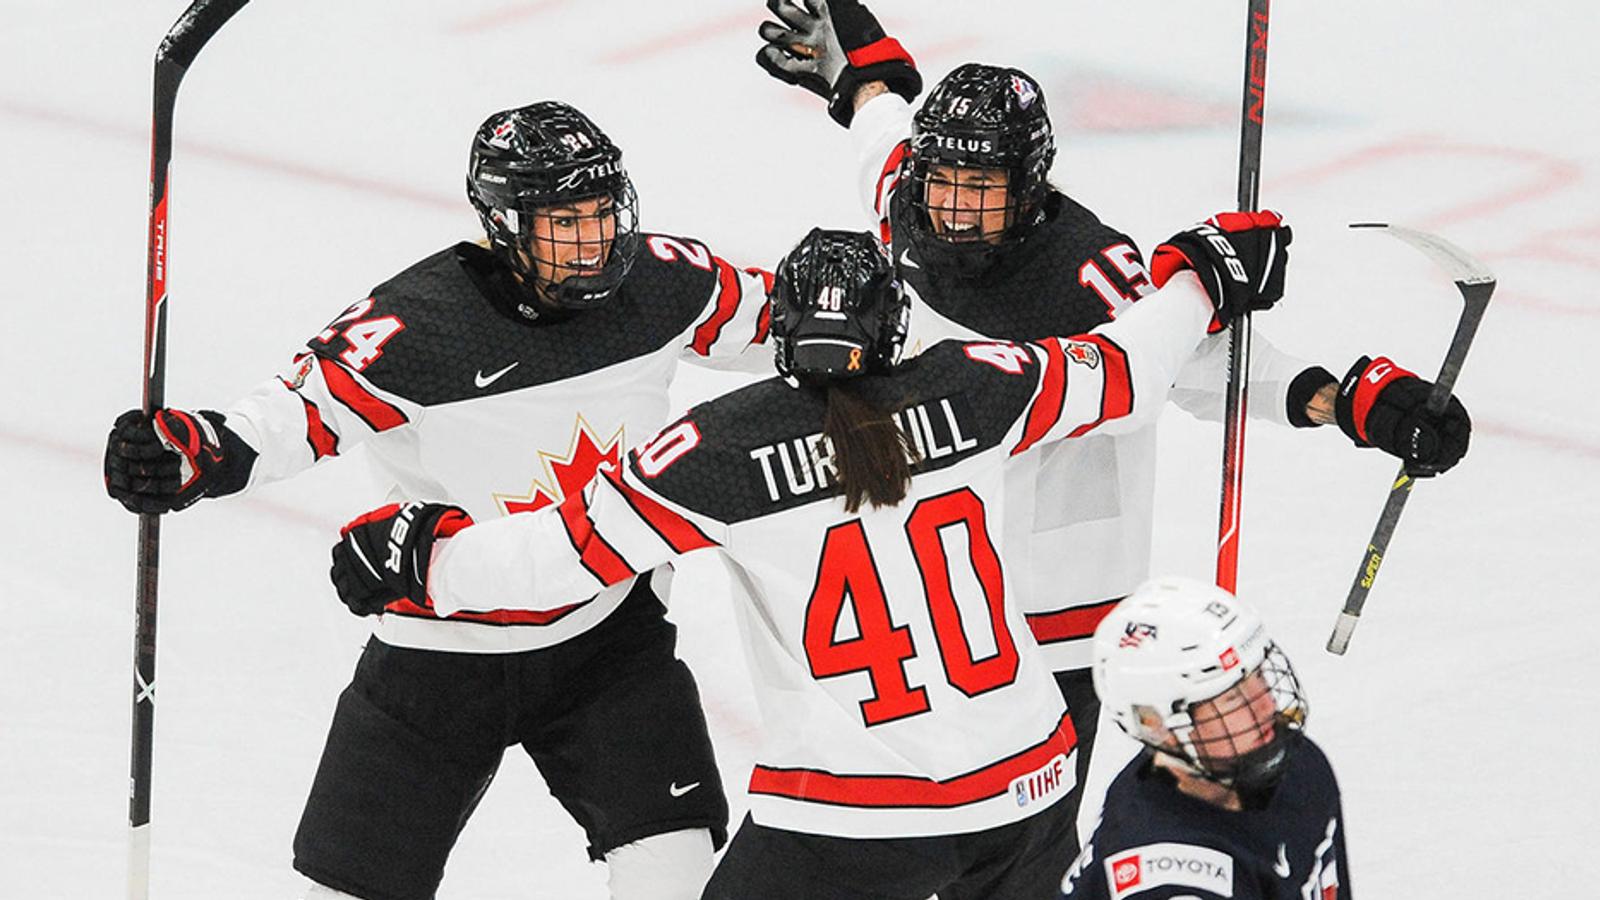 Team Canada earns convincing win over Team USA in the women's world hockey championship